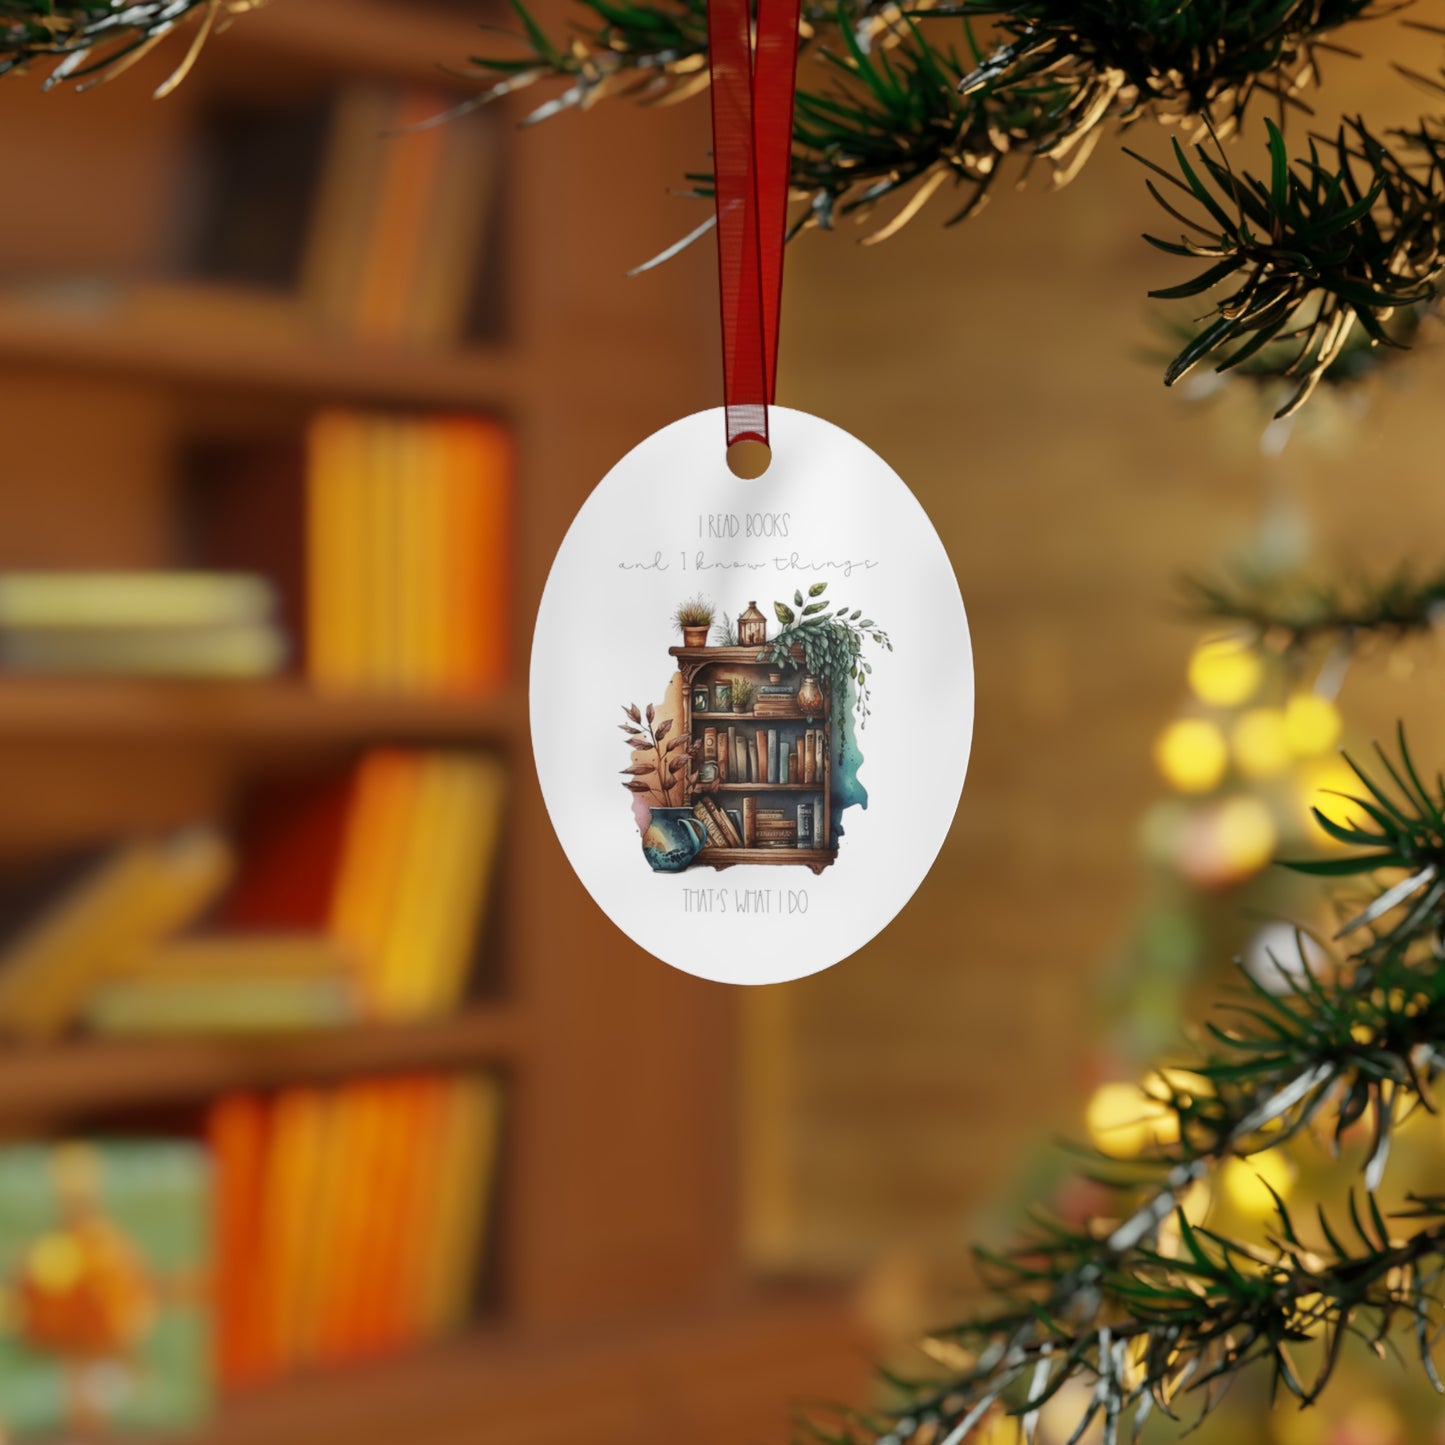 Oval Metal Ornament “I read books and I know things. That’s what I do.”